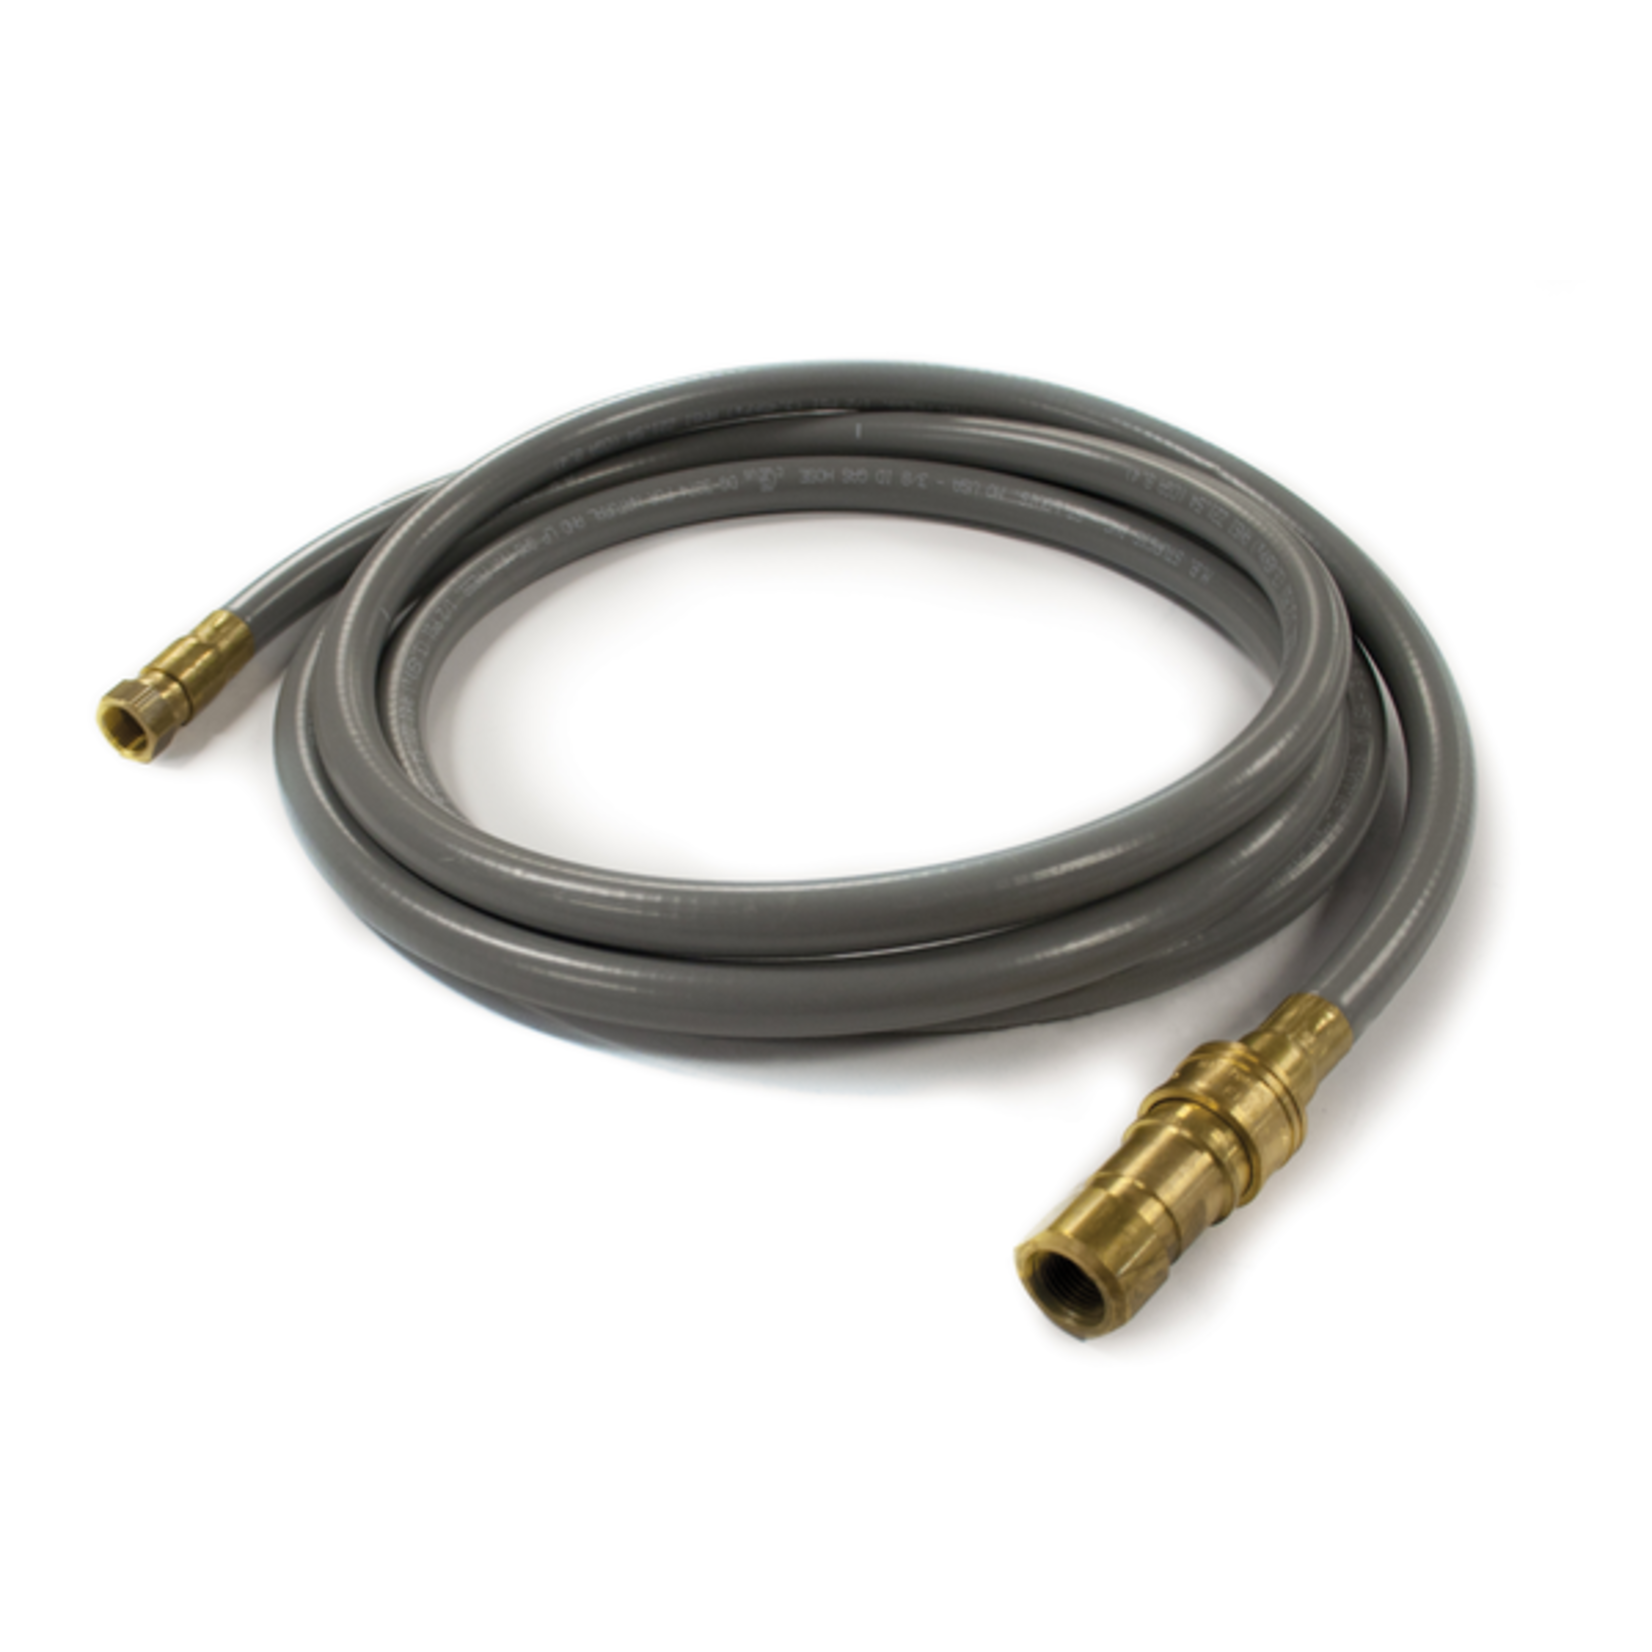 GrillPro 10-FT NATURAL GAS HOSE WITH QUICK DISCONNECT